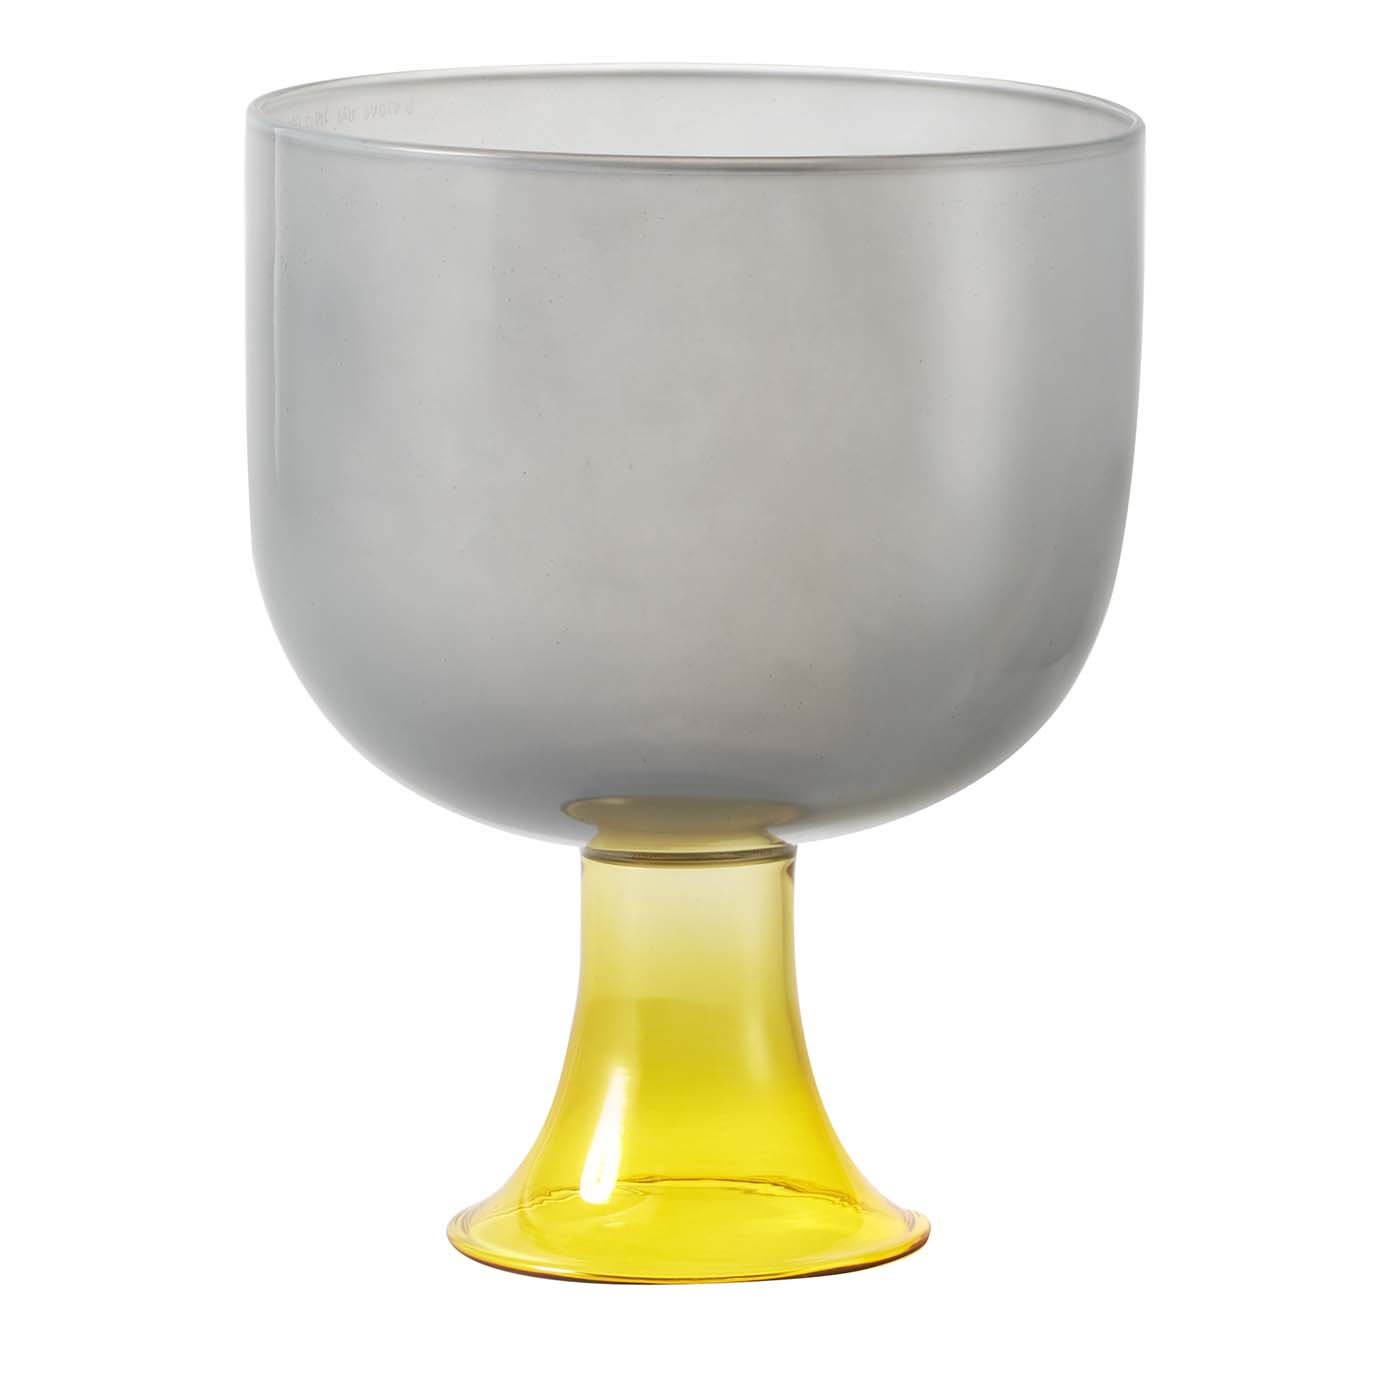 Cuppino Yellow and Gray Goblet by Aldo Cibic - Paola C